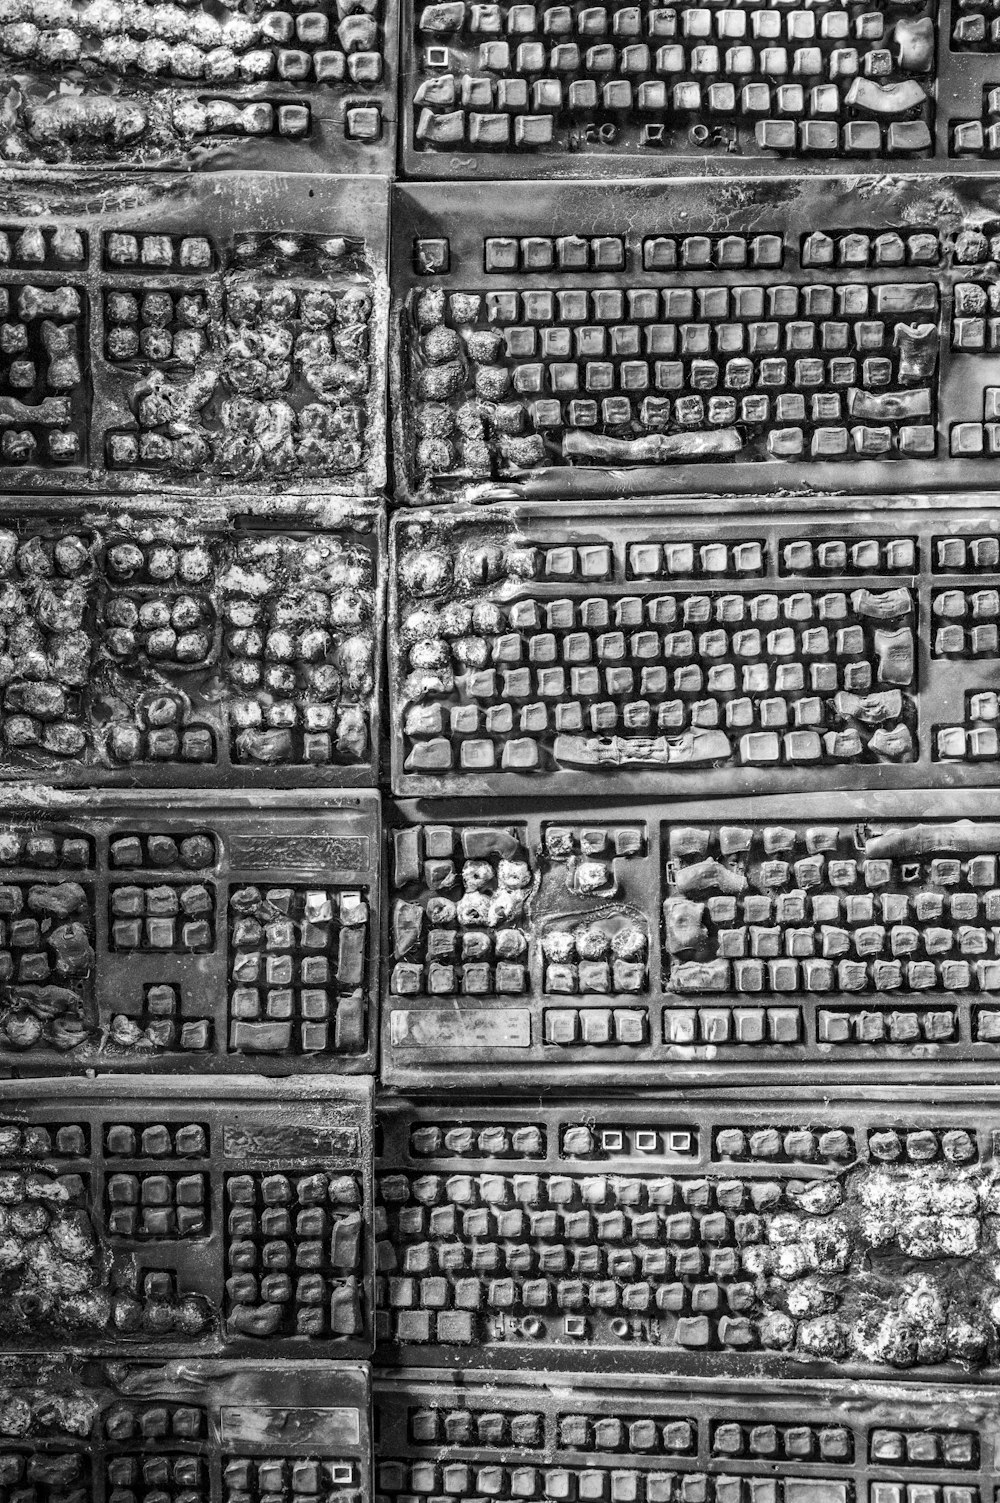 grayscale photo of burnt keyboards